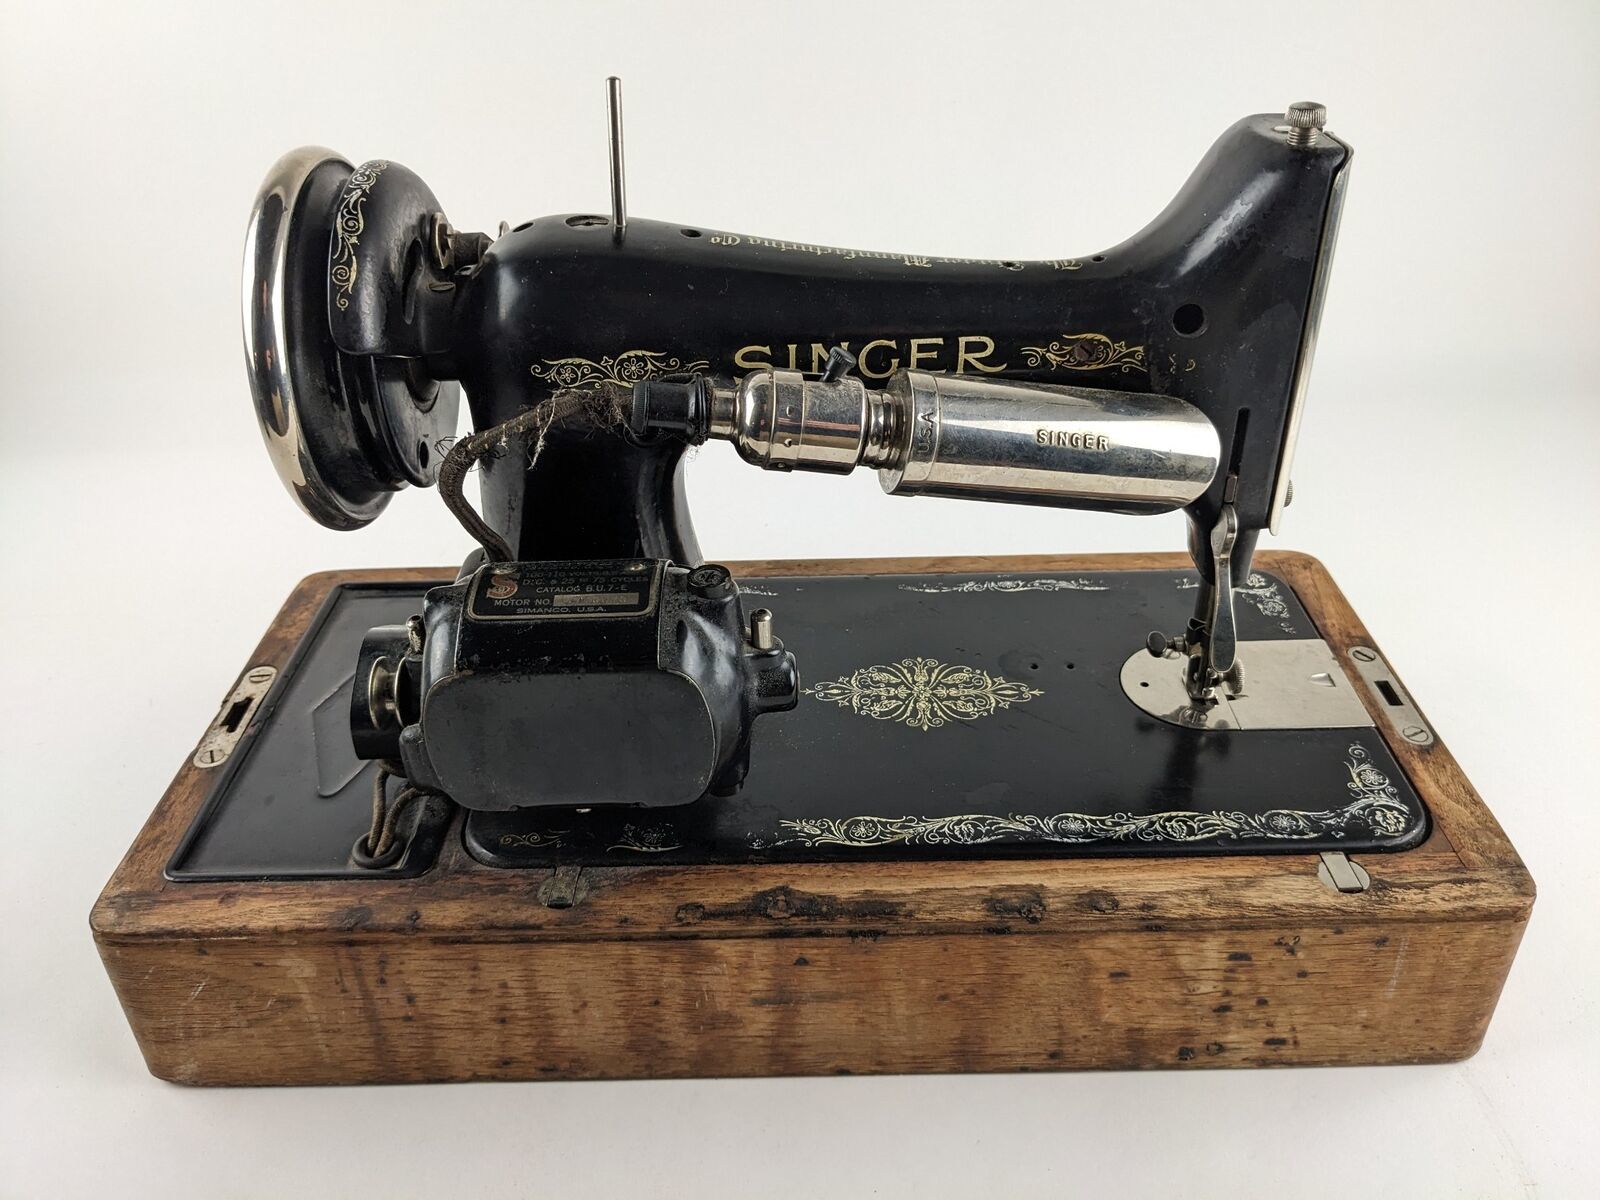 Singer 44S Heavy Duty 97 Stitch Applications Sewing Machine in